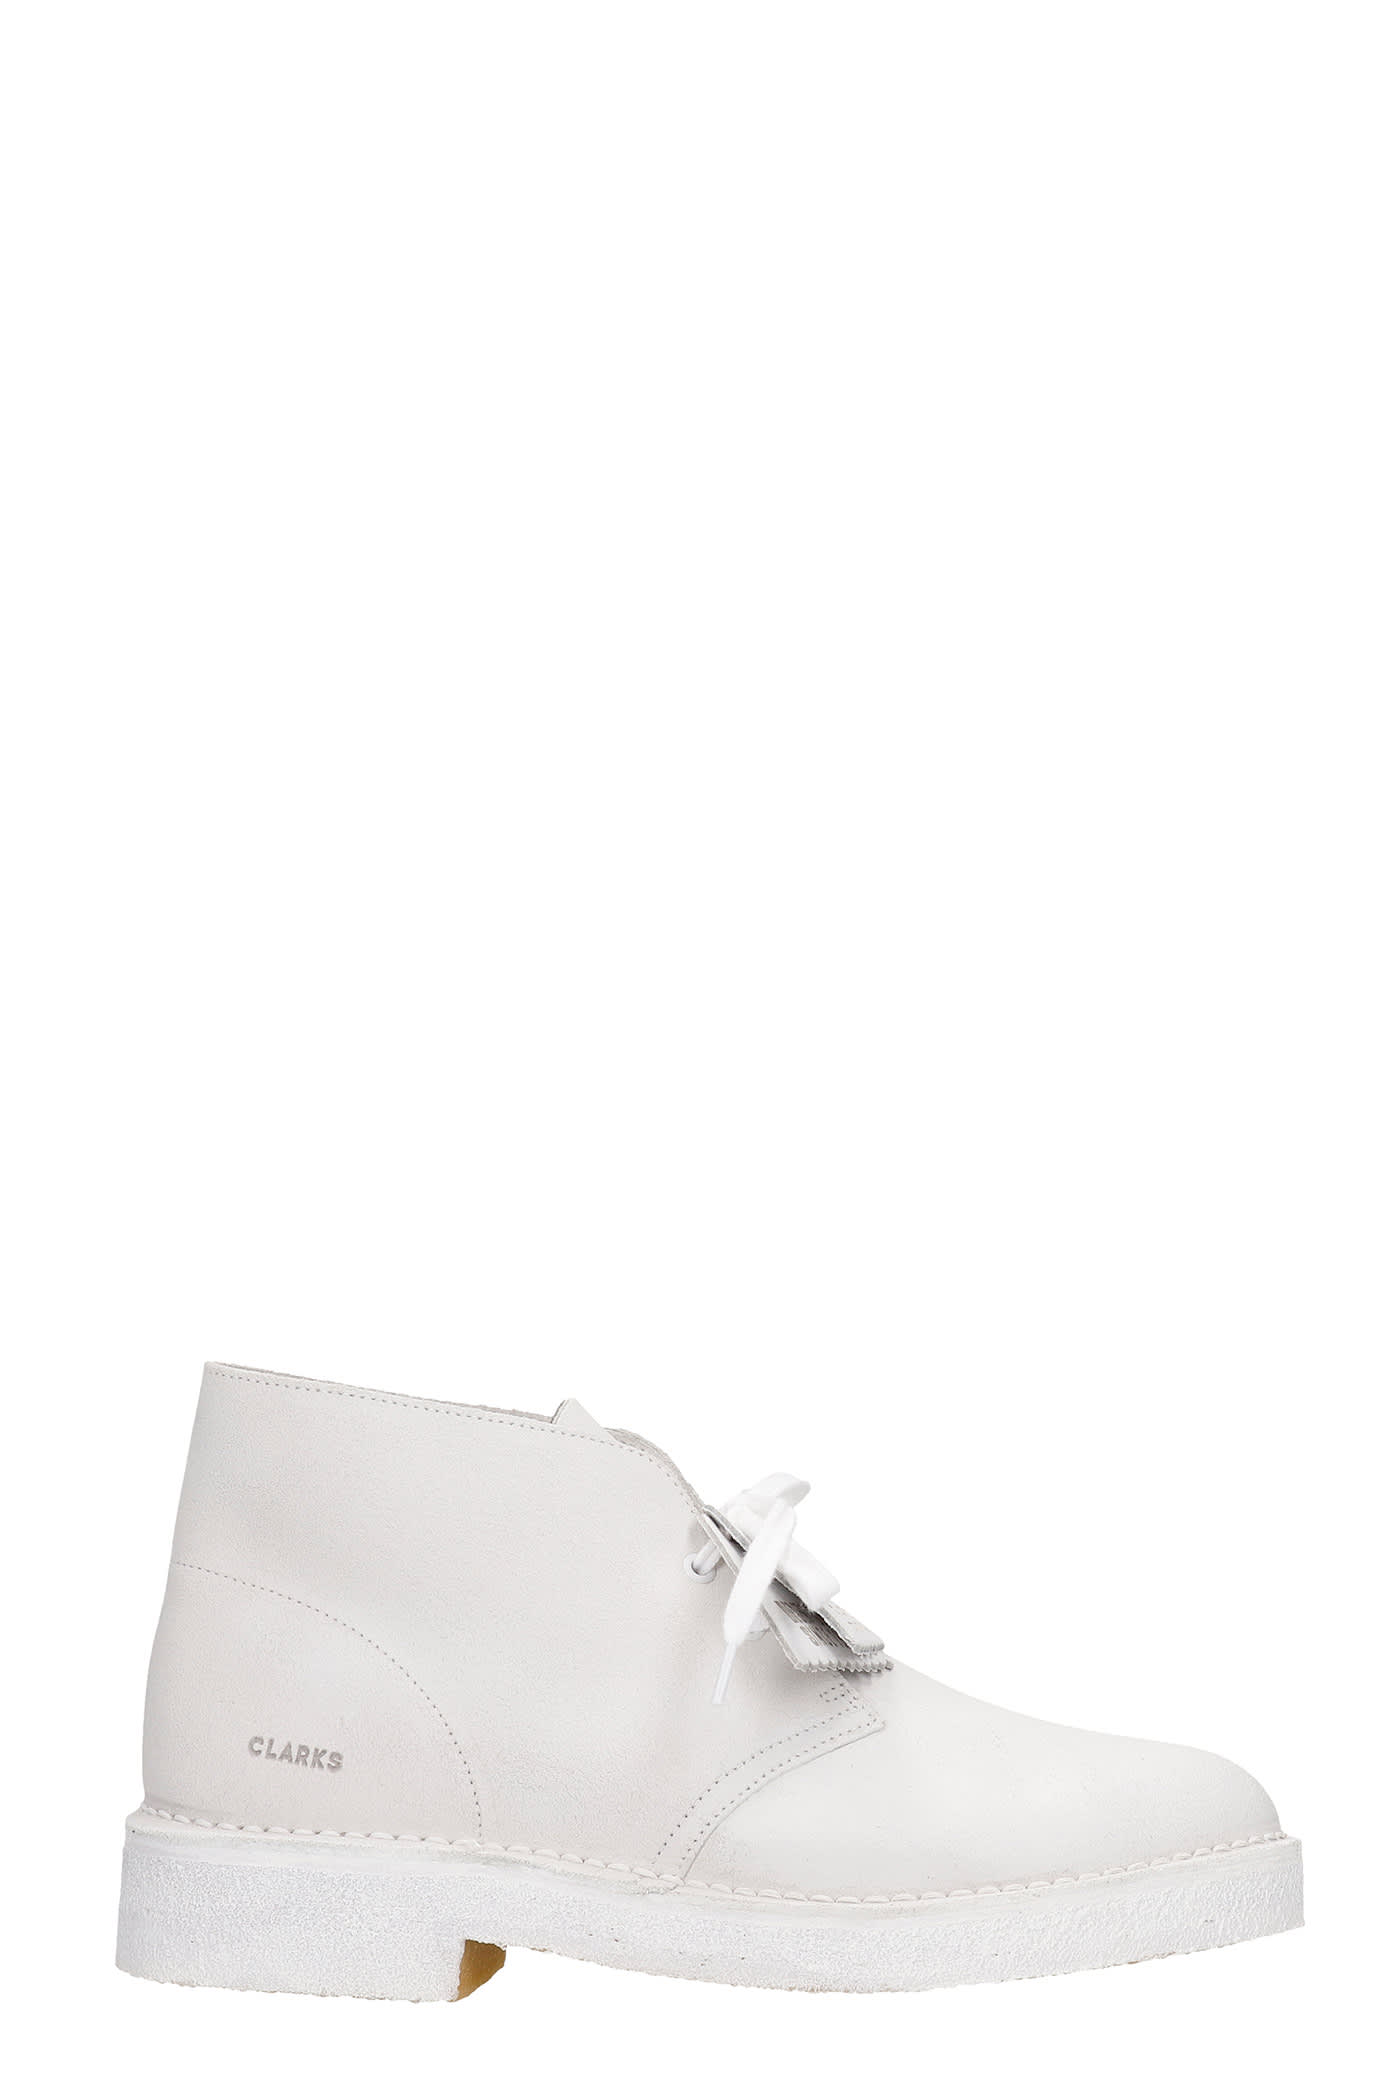 Clarks Desert Boot 221 Lace Up Shoes In White Nubuck